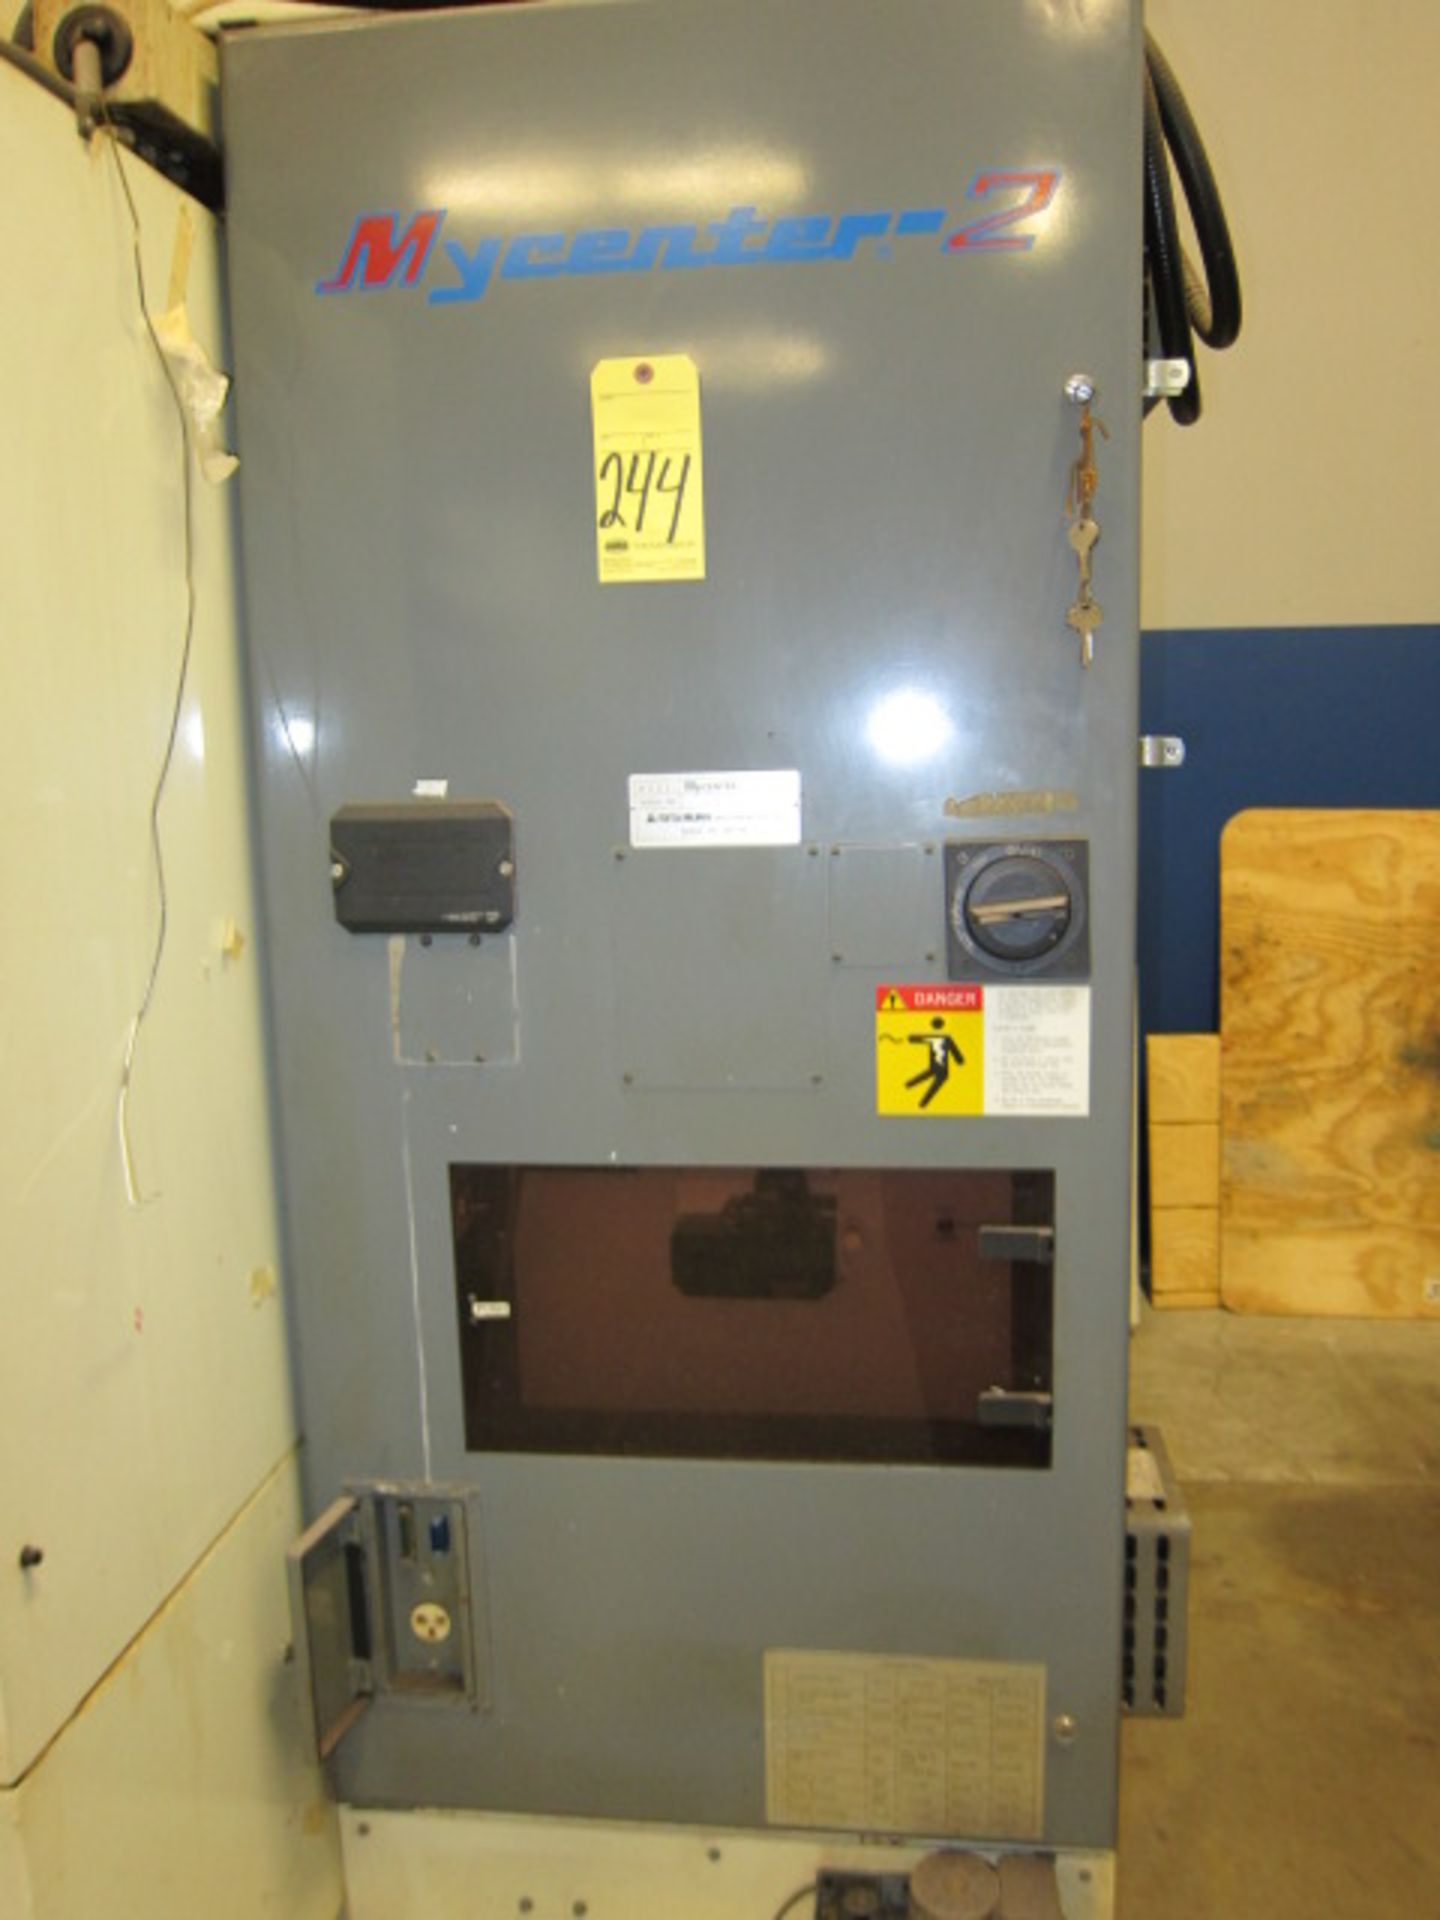 4-AXIS VERTICAL MACHINING CENTER, KITAMURA MDL. MY-CENTER 2, Fanuc OM CNC control, CAT-40 spdl. - Image 6 of 8